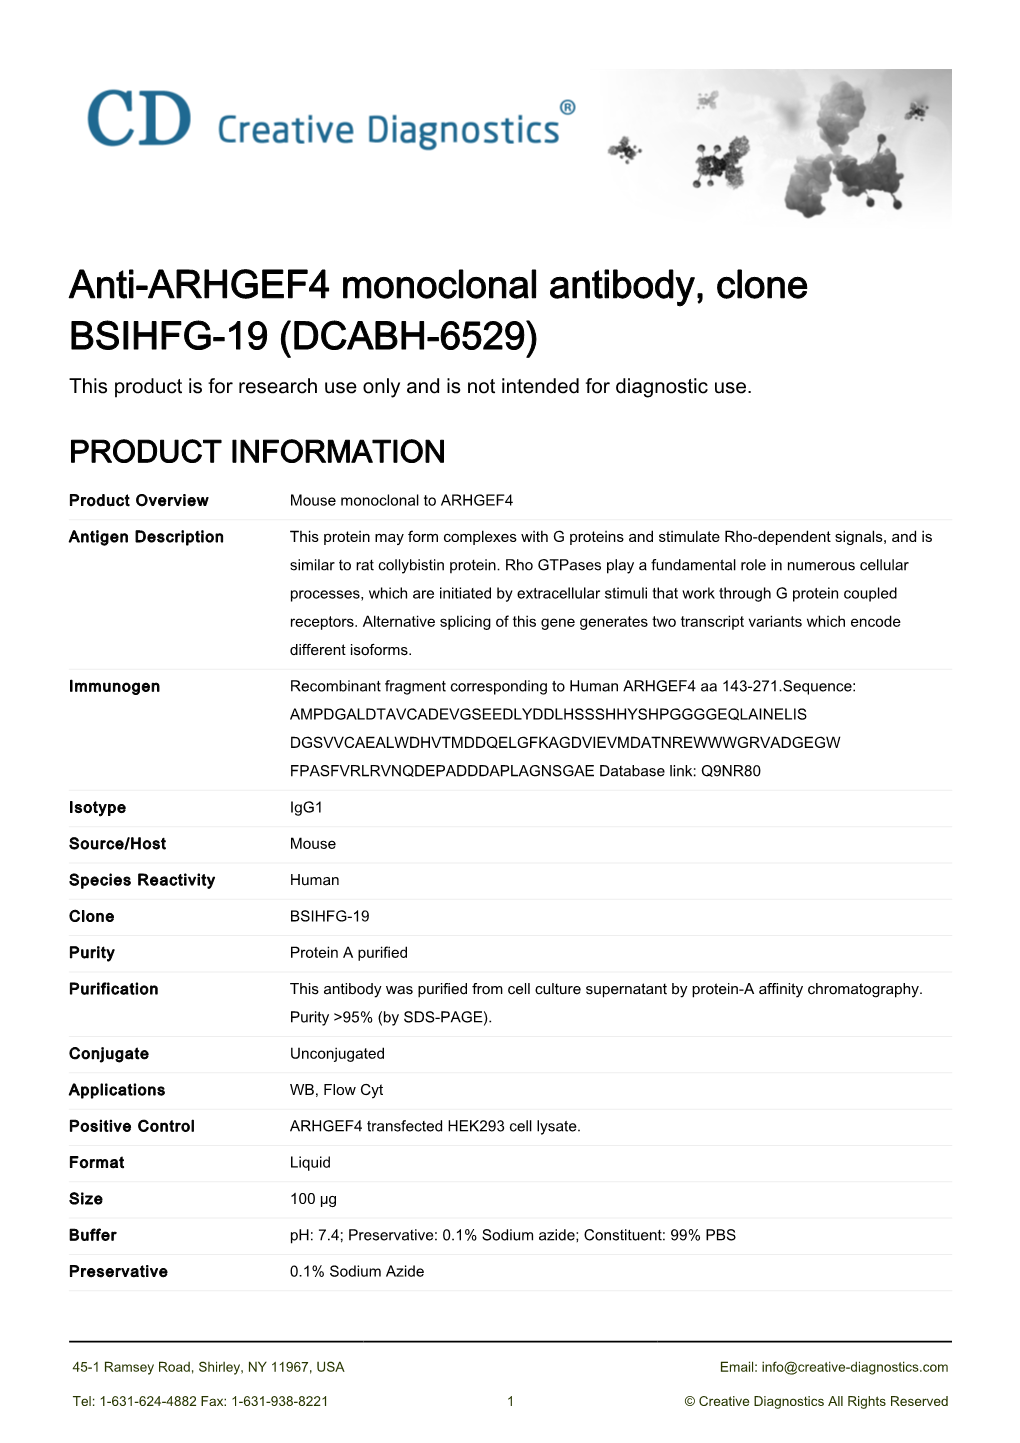 Anti-ARHGEF4 Monoclonal Antibody, Clone BSIHFG-19 (DCABH-6529) This Product Is for Research Use Only and Is Not Intended for Diagnostic Use